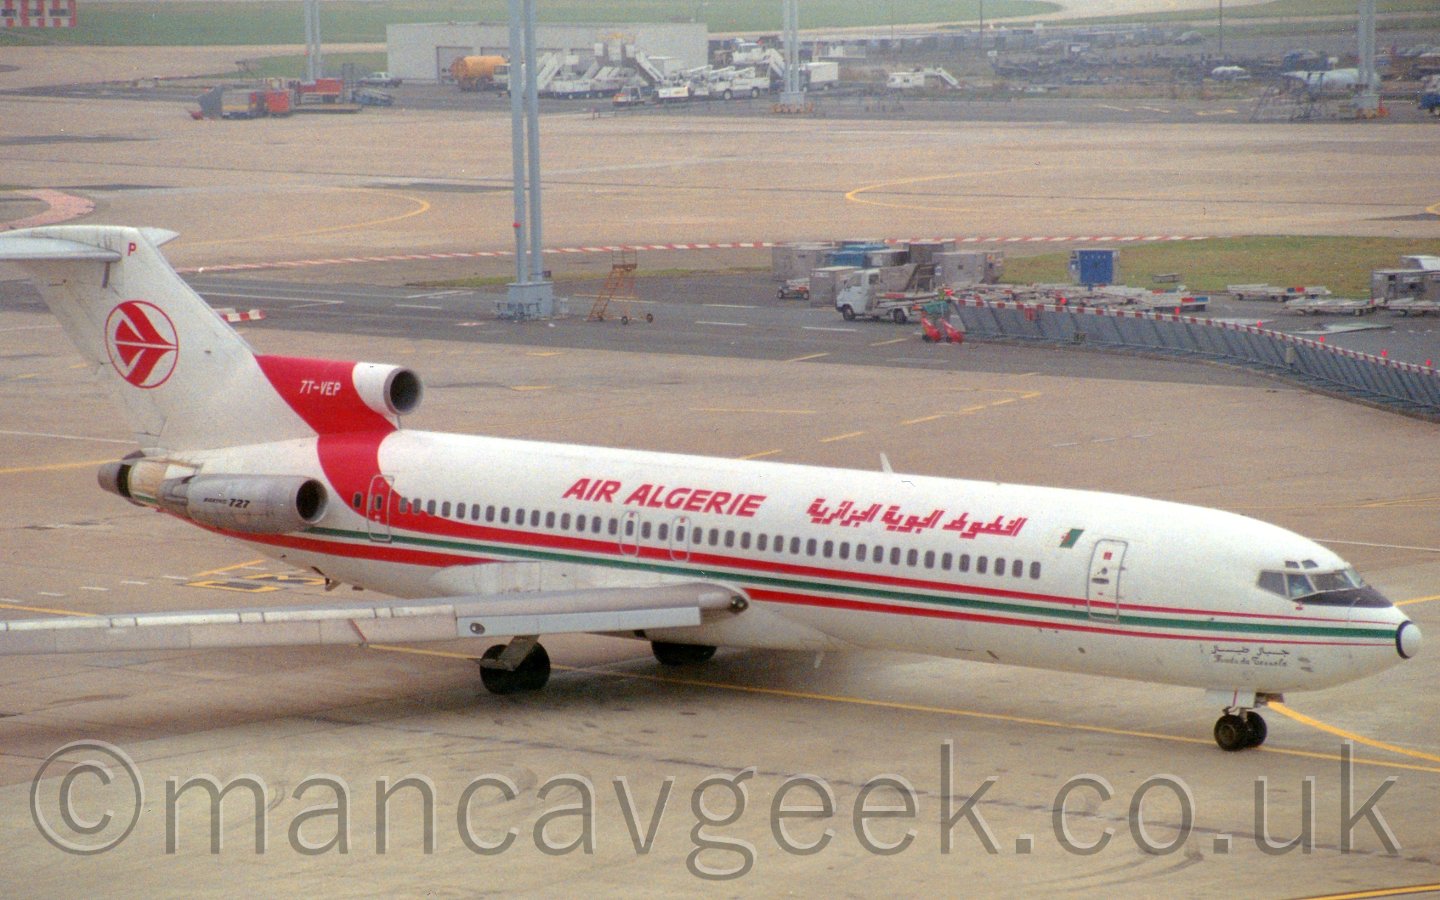 Side view of a 3 engined jet airliner with the engines mounted on the rear fuselage. The plane is mostly white, with a red/green/red stripe running along the body, the upper red part sweeping up over the tail-mounted engine, with the registration "7T-VEP". There are red "AIR ALGERIE" titles on the upper fuselage, in English above the wings, and in an Arabic script further forward. The side-mounted engines have a natural metal finish, with black "Boeing 727" titles. The tail is white, with the red outline of a circle, with the stylised image of a red flying bird in the middle. In the background, a grey metal barrier with alternating white and rad bands on the top runs from the middle left of the frame towards the centre, with some baggage carts parked behind it, with another parking area for vehicles at the top of the frame, next to a low grey building.